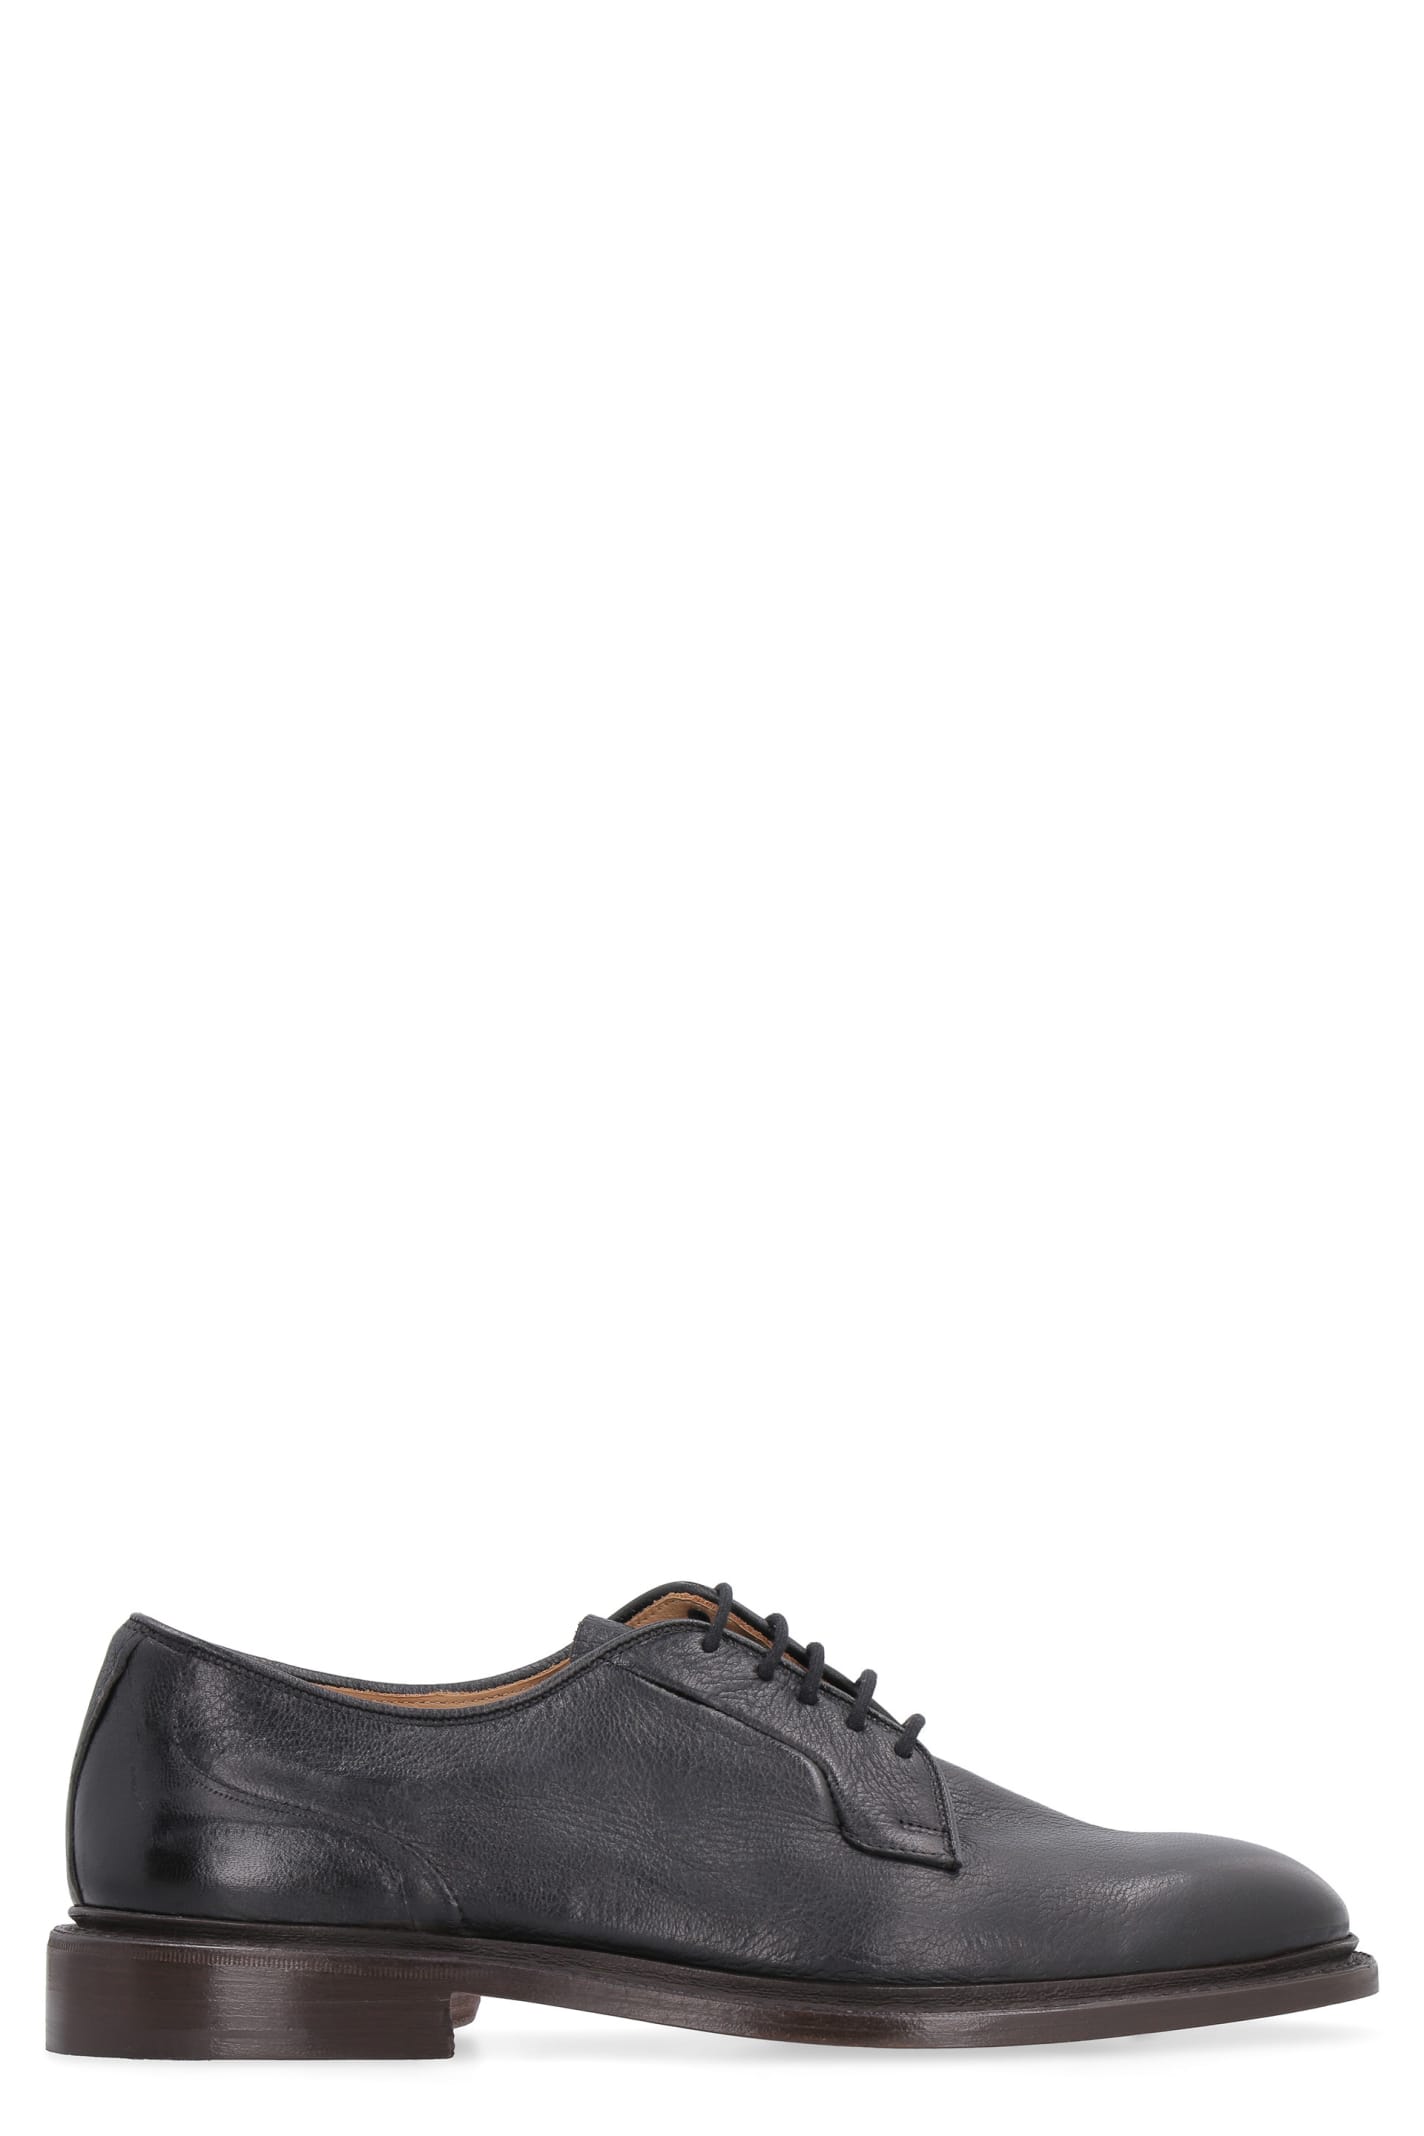 Tricker's Robert Leather Derby Shoes In Black